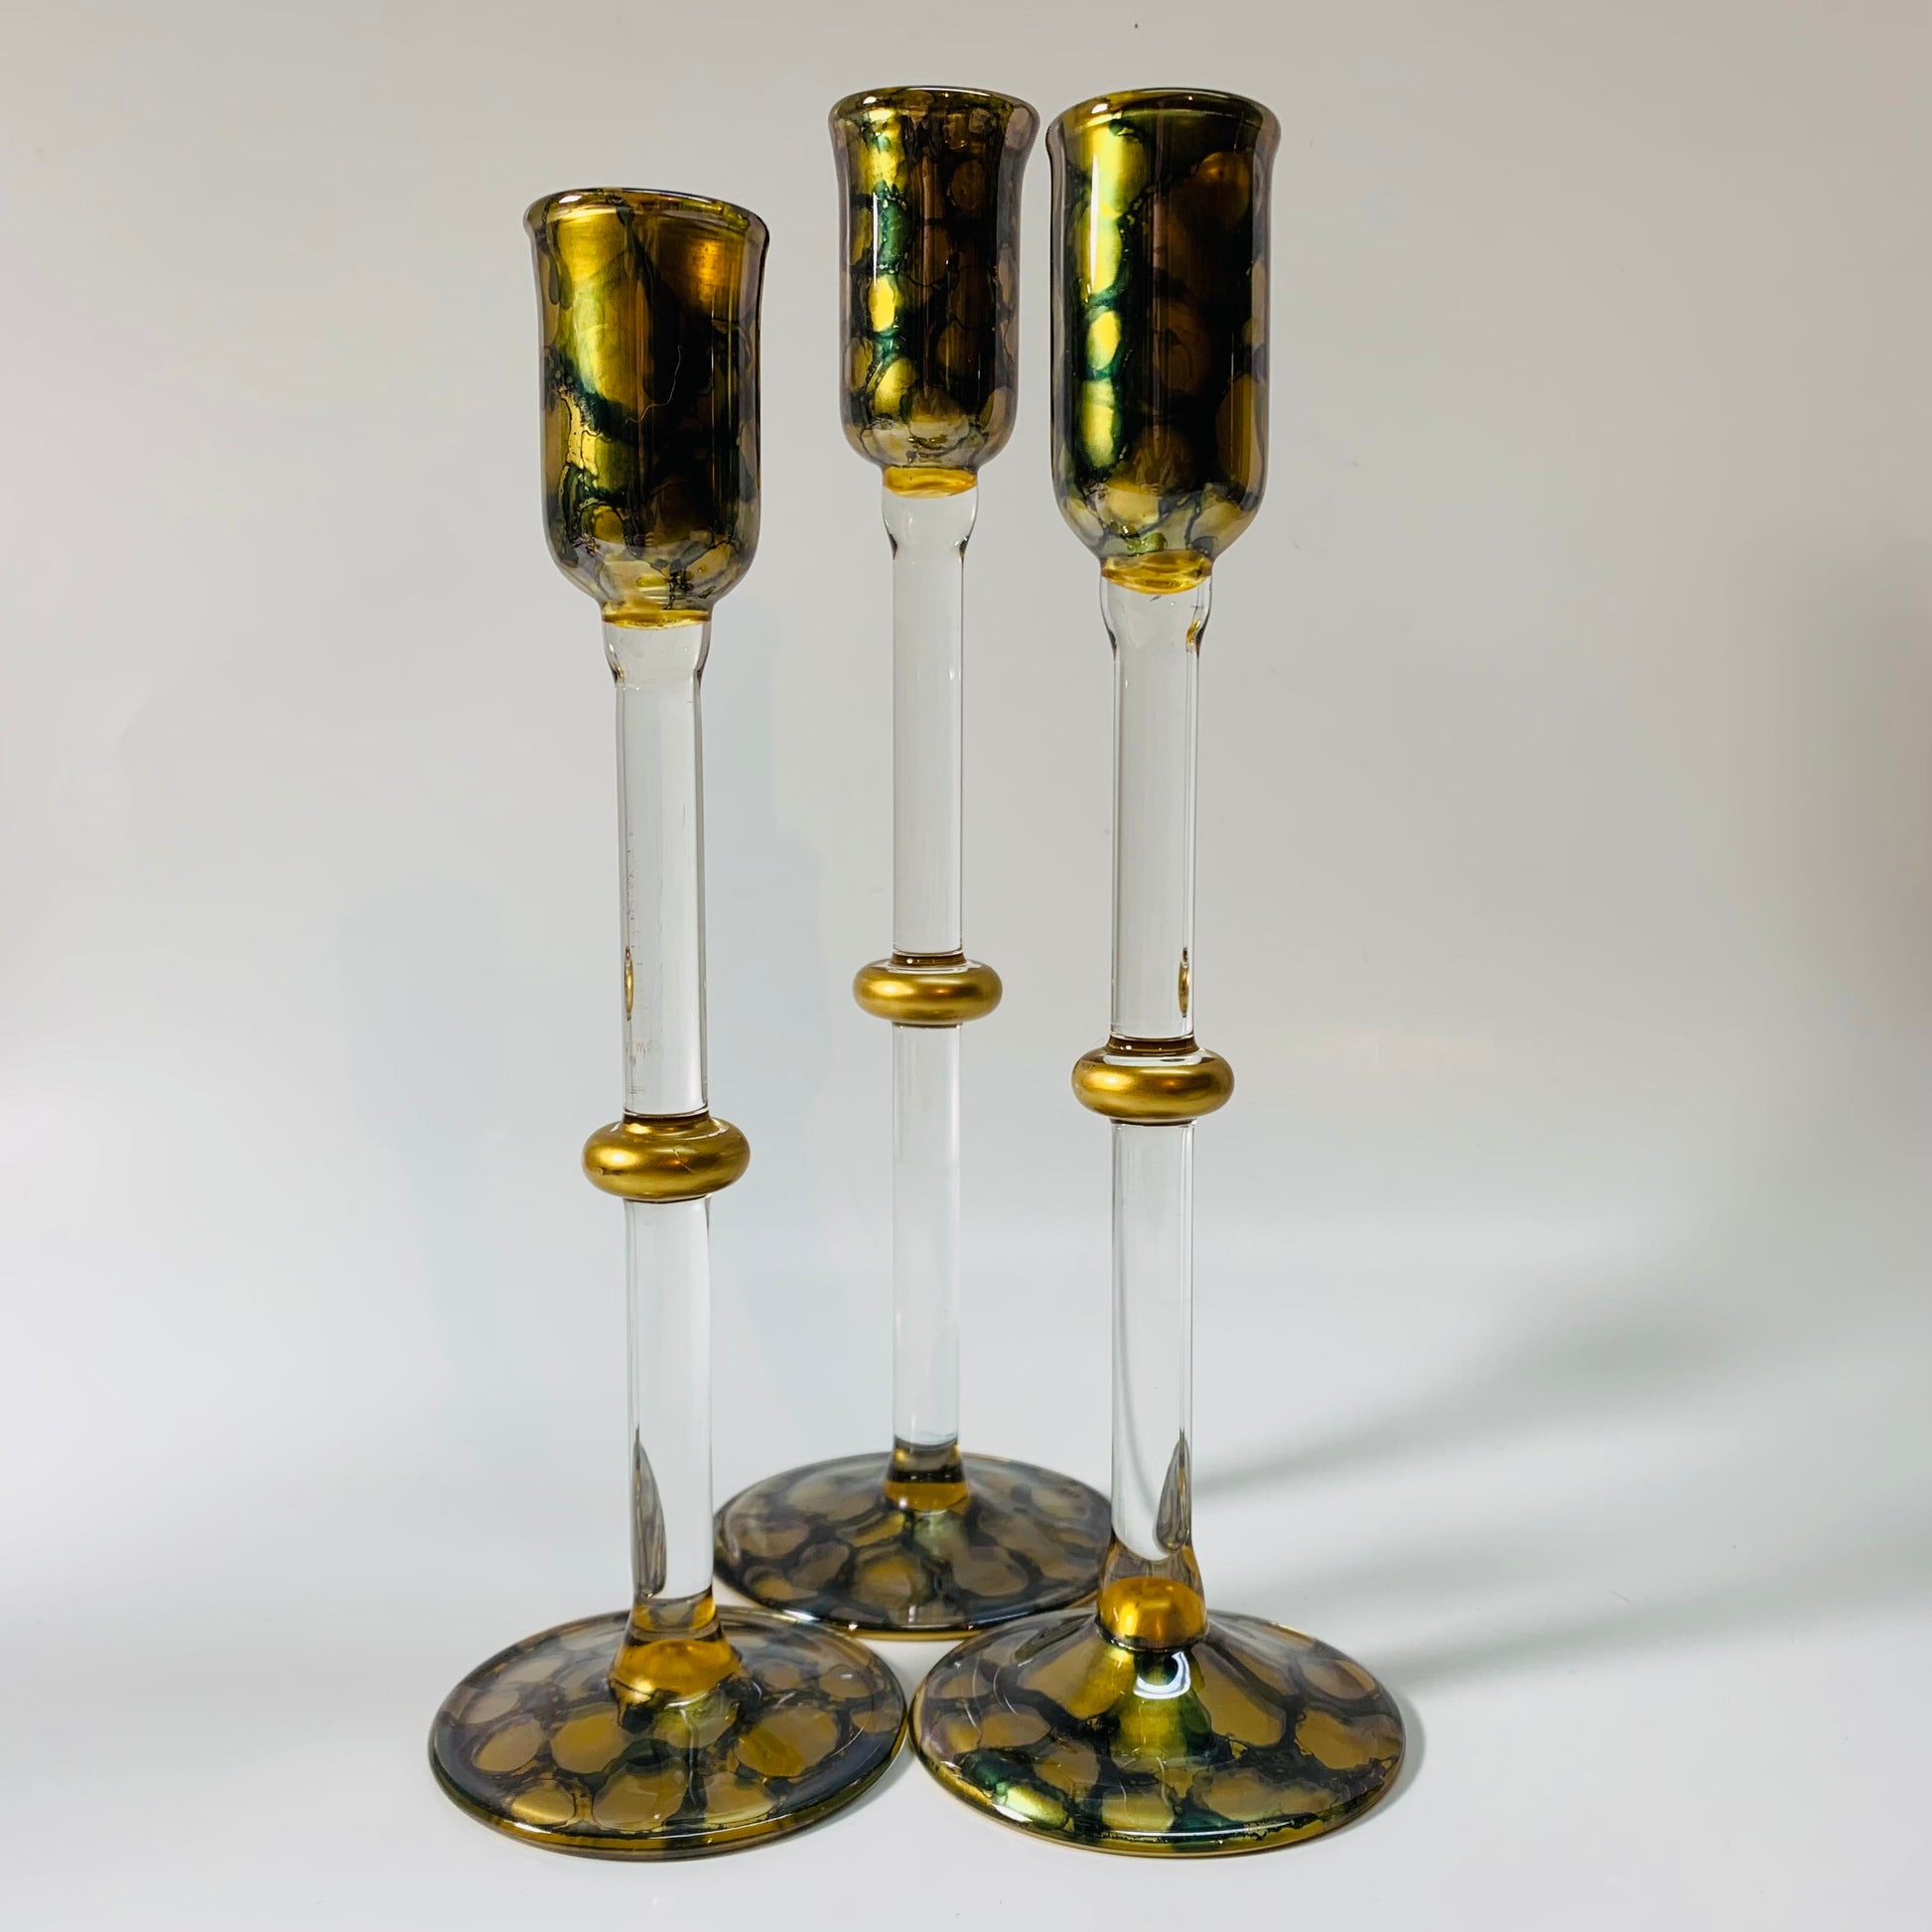 Long Stem Blown Glass Candle Holder - Tulip Gold & Teal